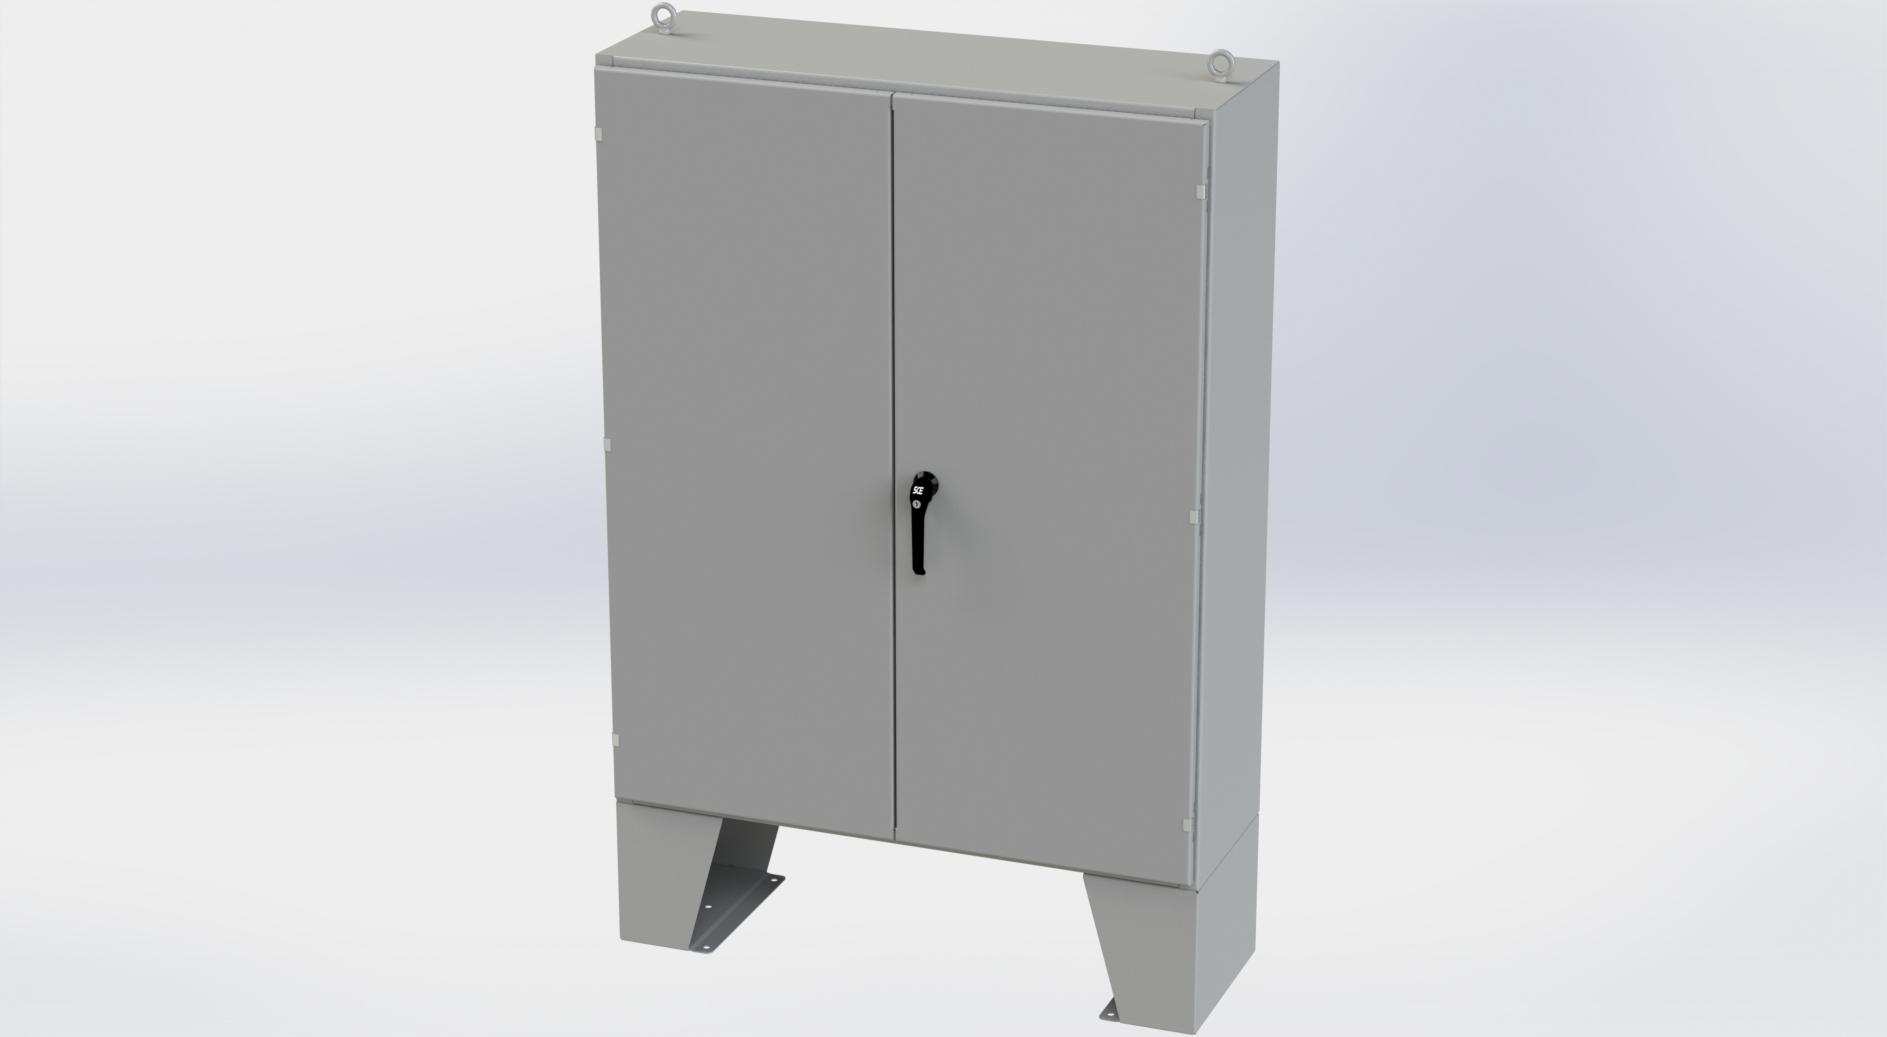 Saginaw Control SCE-604816LP 2DR LP Enclosure, Height:60.00", Width:48.00", Depth:16.00", ANSI-61 gray powder coating inside and out. Optional sub-panels are powder coated white.